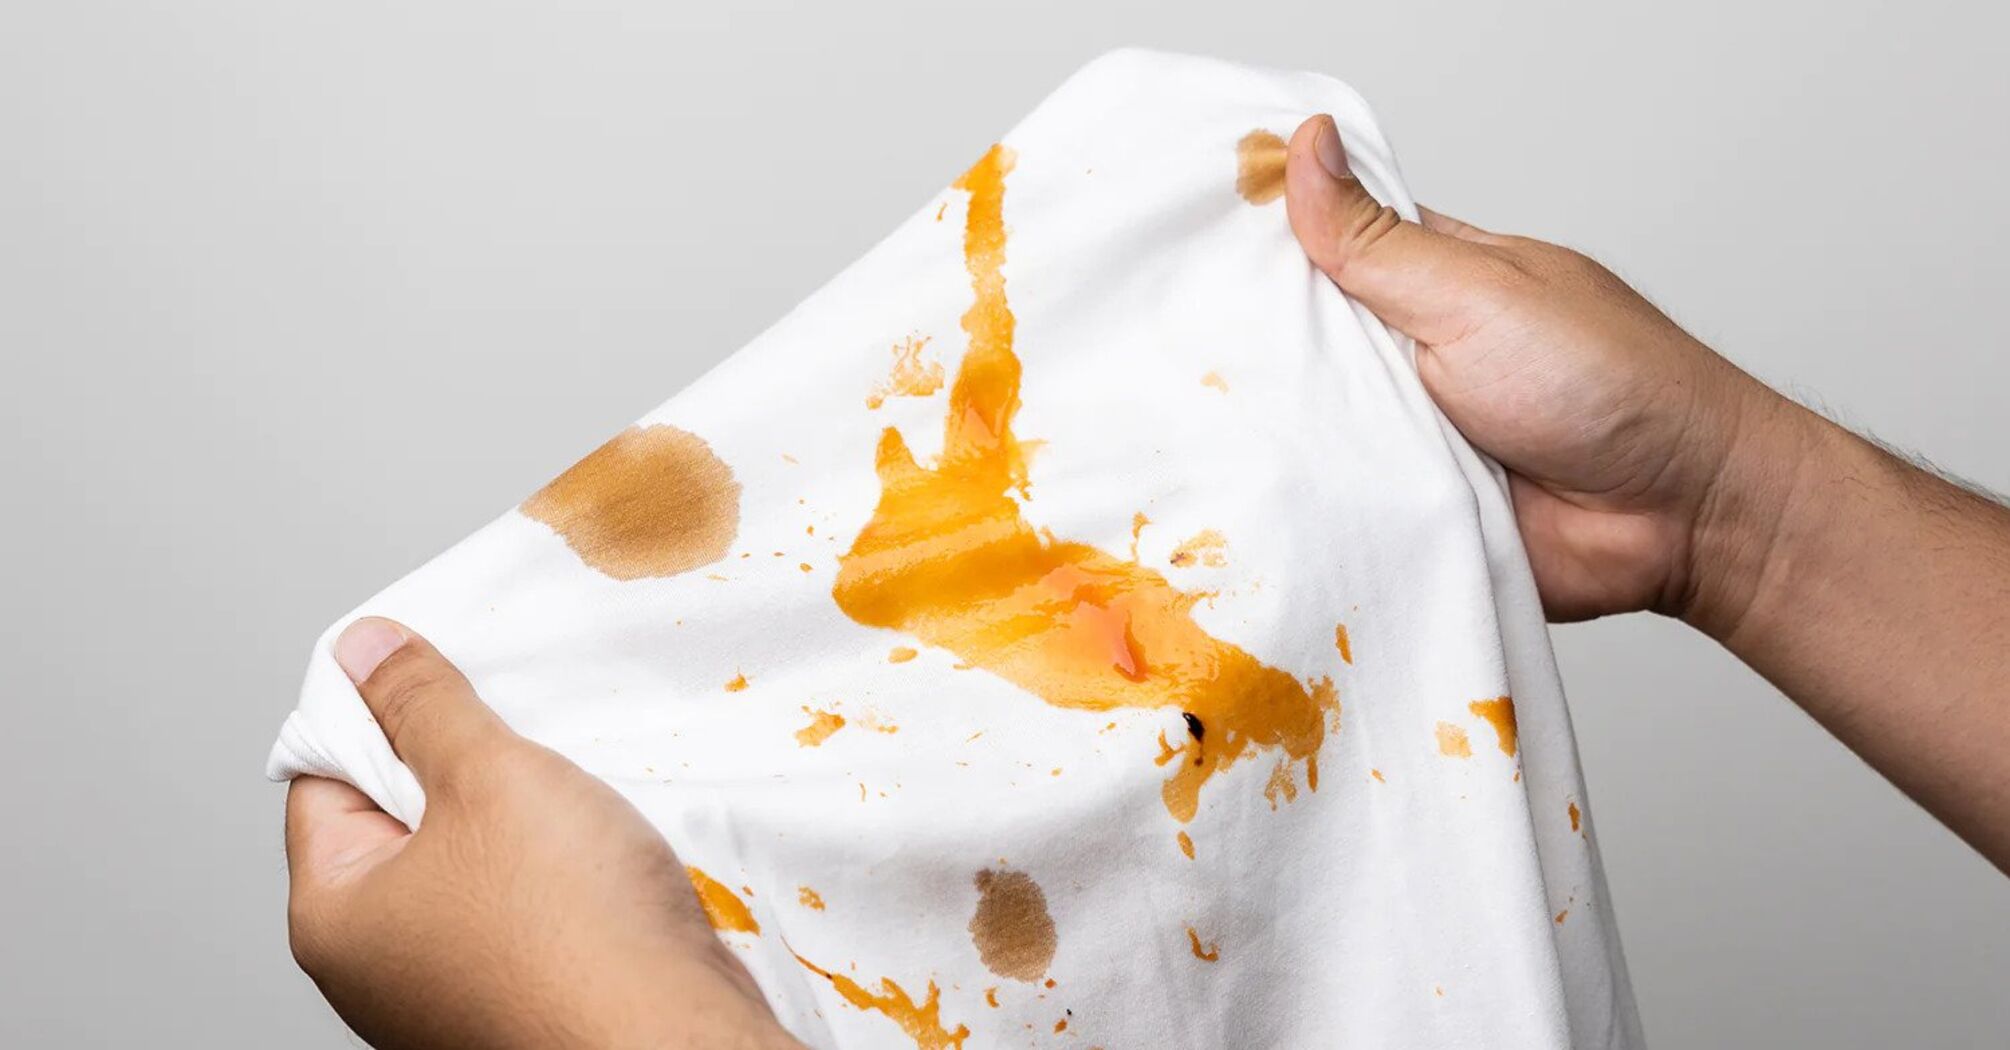 How to remove stains from children's clothes without chemicals